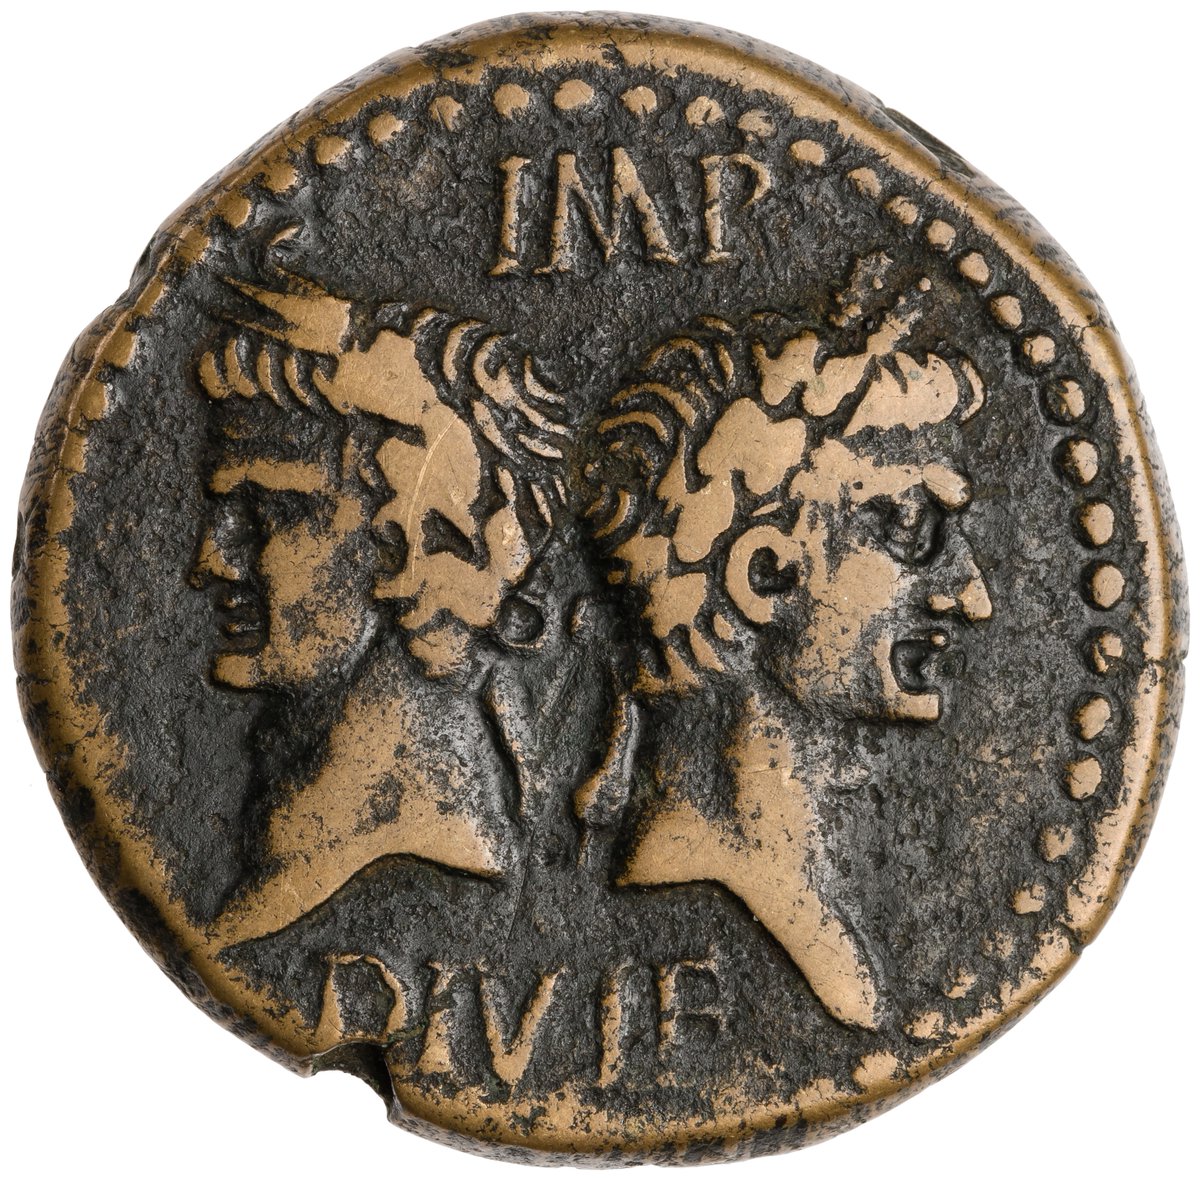  #CLST6 In this  #LookCloser8, I'm going to take a look at this coin minted under Augustus at Nemausus (modern day Nîmes) around 9-3 BCE. Especially early in the empire, provincial mints had more autonomy, and produce some interesting and unique coins like the one below.